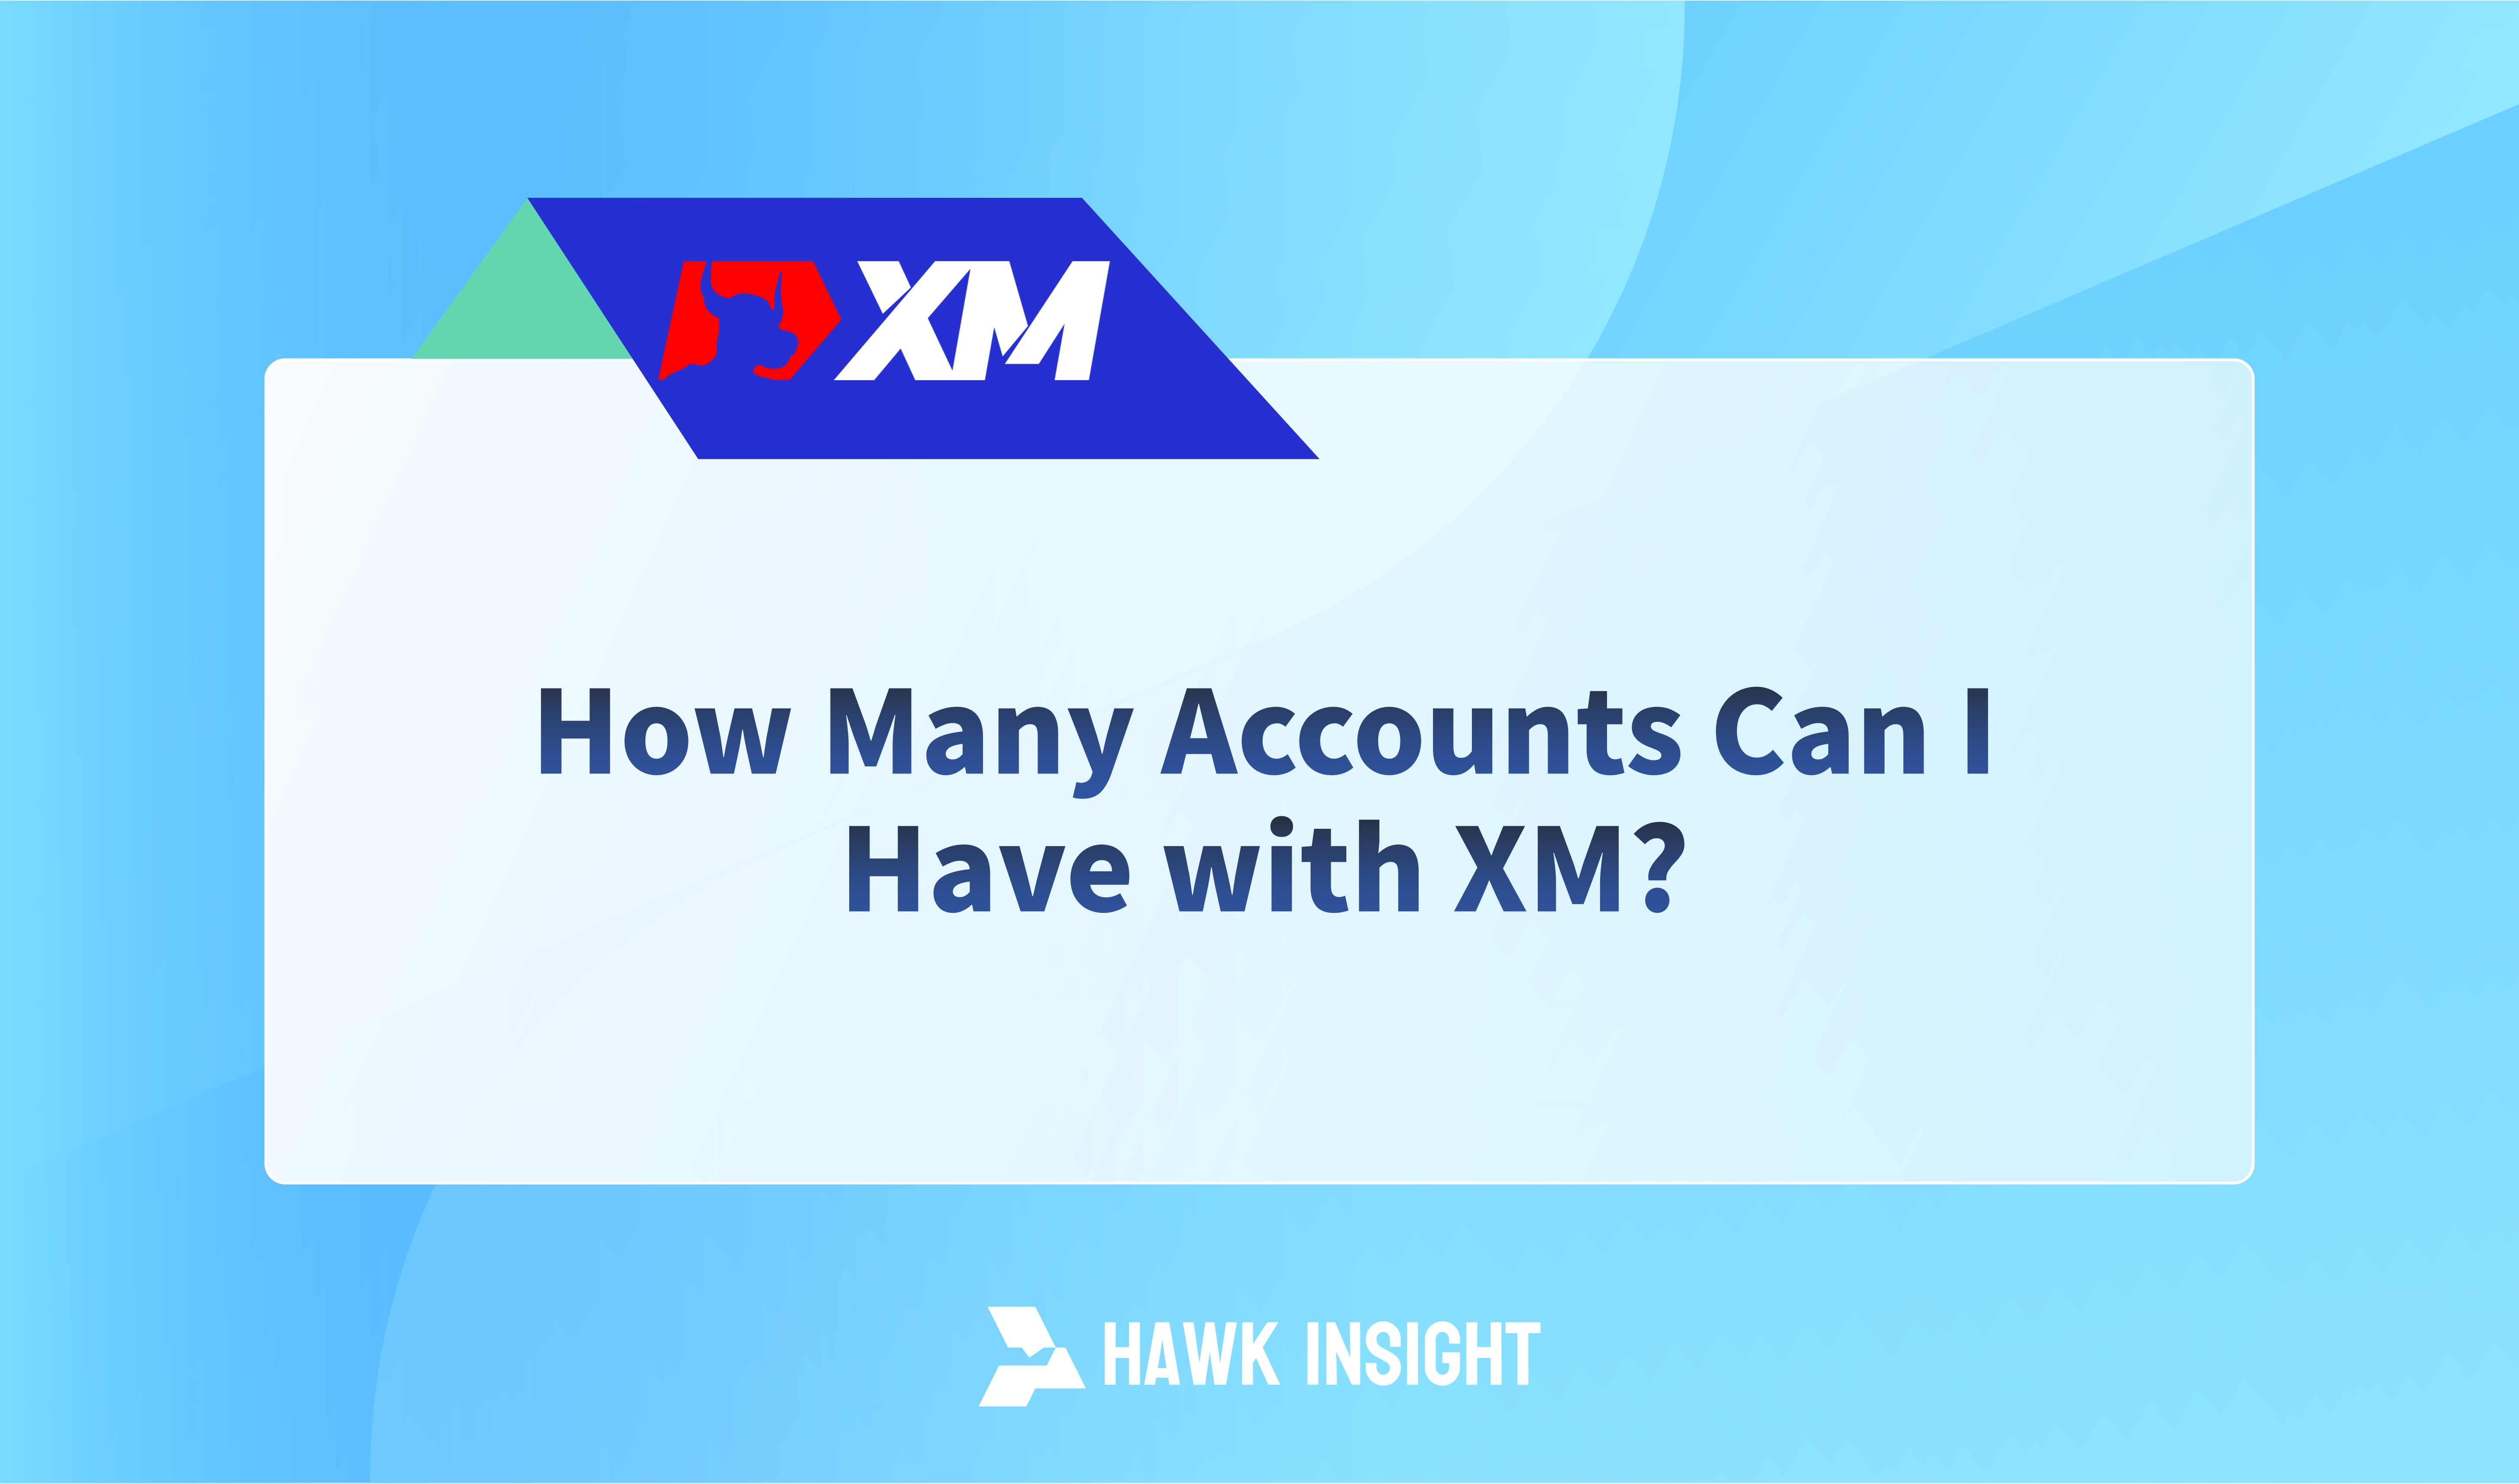 How Many Accounts Can I Have with XM?